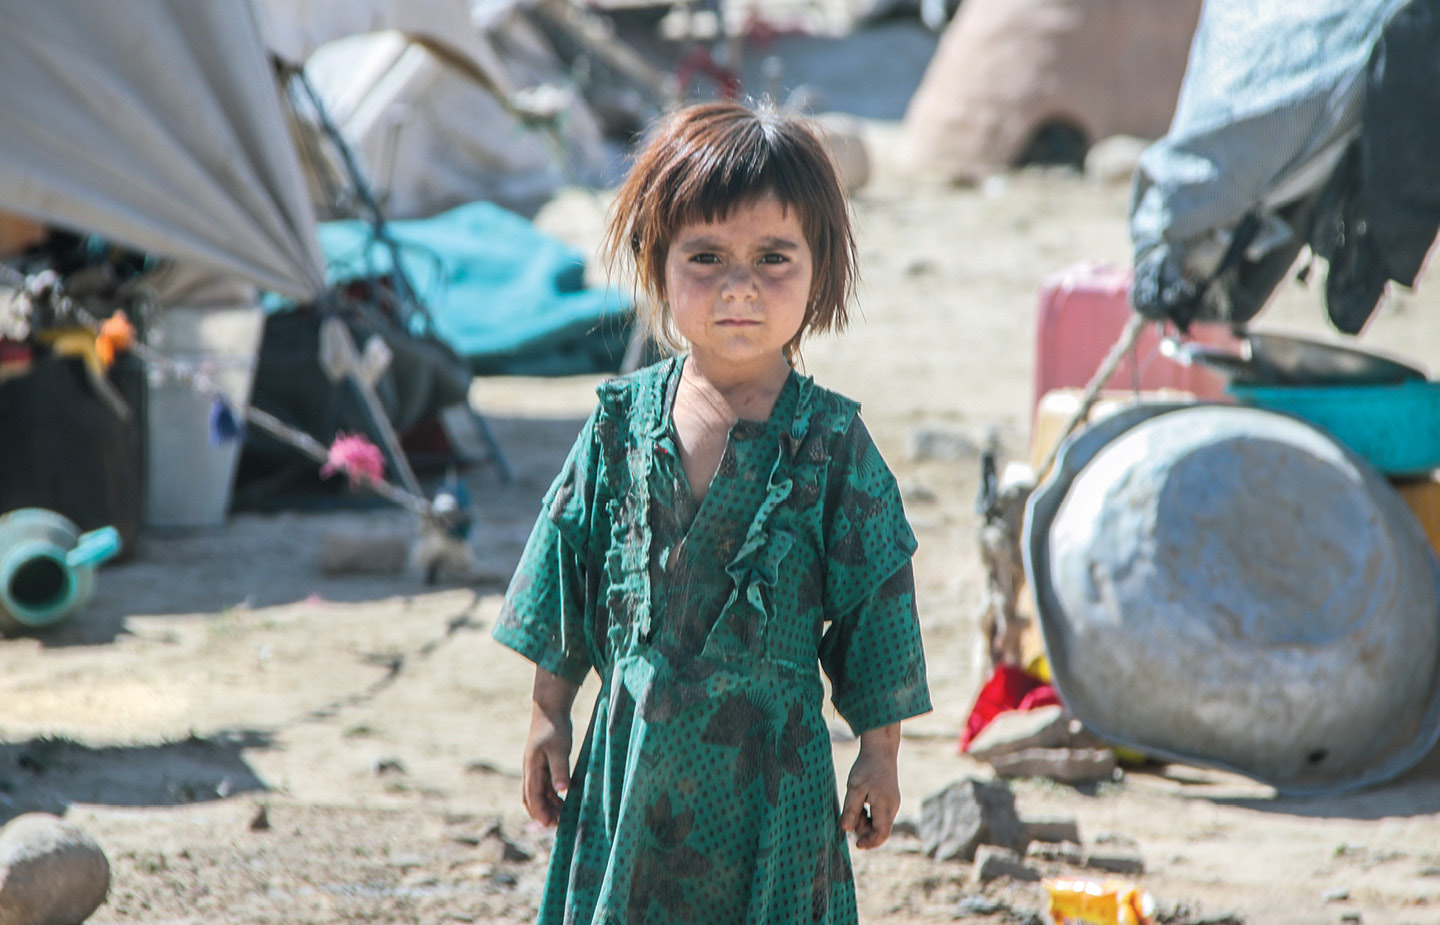 Child on desolate landscape in Afghanistan